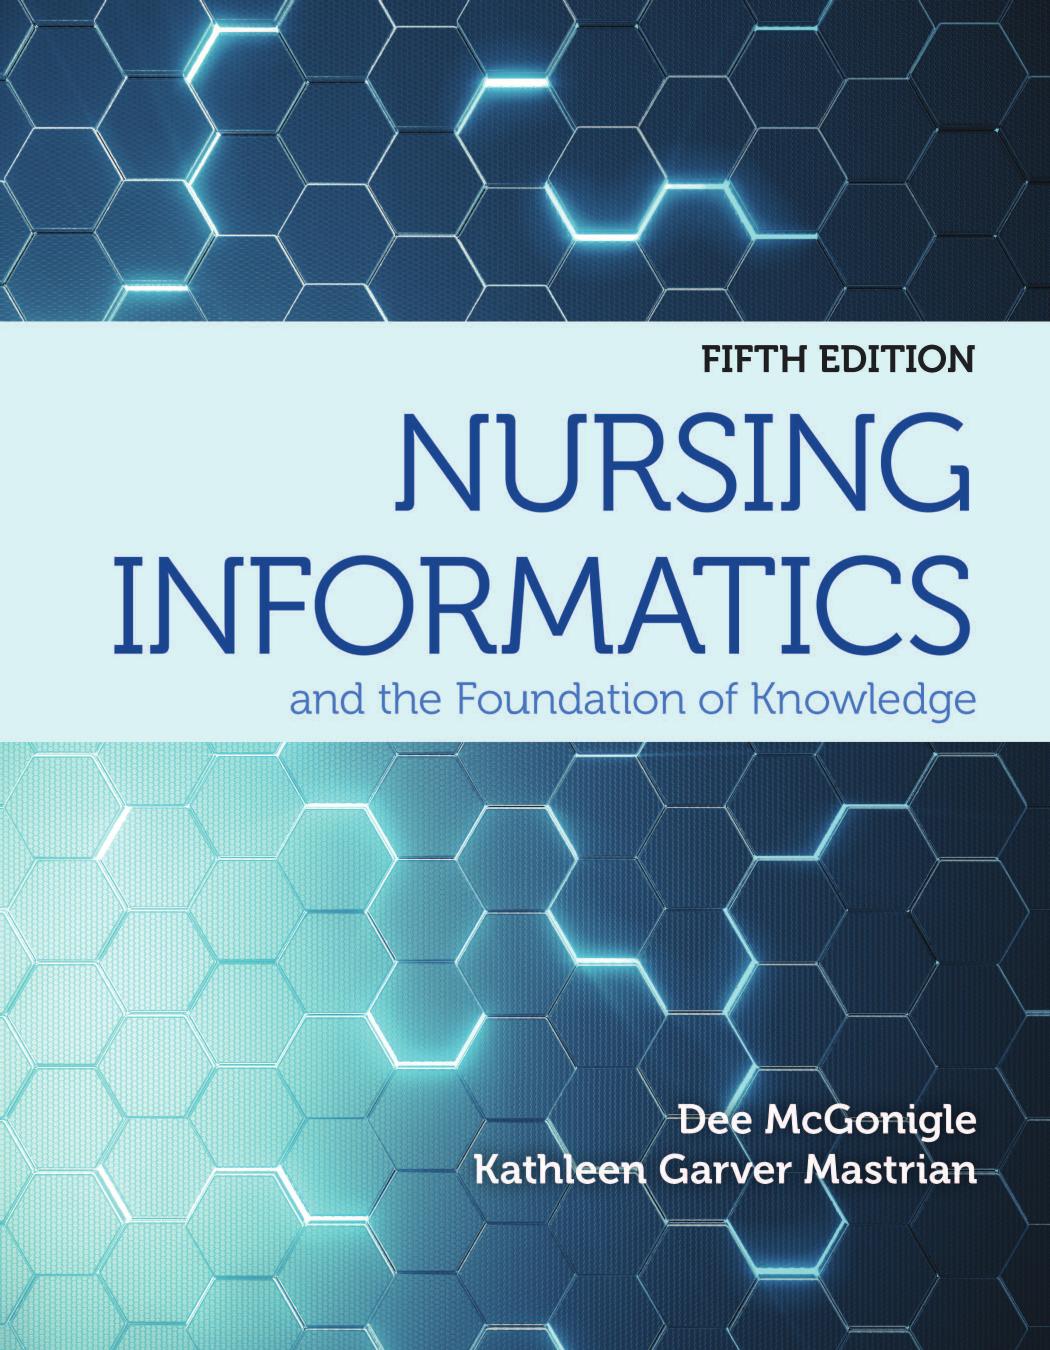 (eBook PDF)Nursing Informatics and the Foundation of Knowledge 5th Edition by Dee McGonigle,Kathleen Mastrian